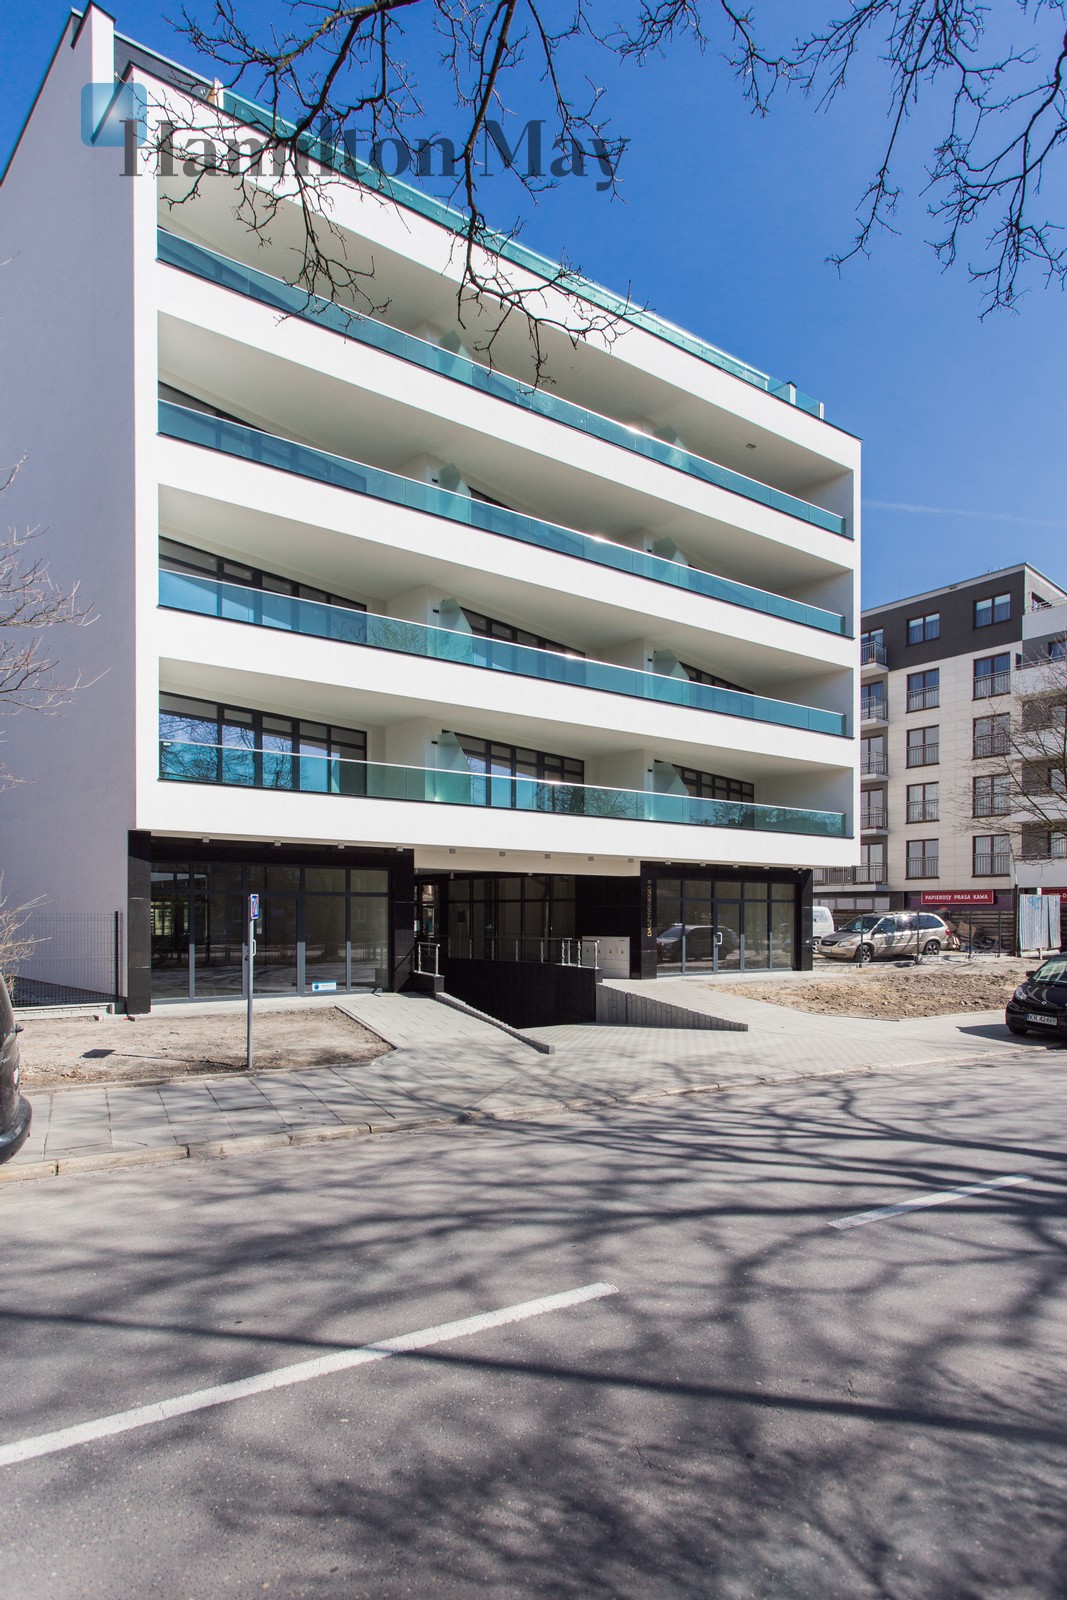 Level: 5 Status: existing Number of units: 45 Sale price from: 300000PLN Avg. sales price/m2: 11500PLN Rental price from: nullPLN Avg. rental price/m2: nullPLN - slider